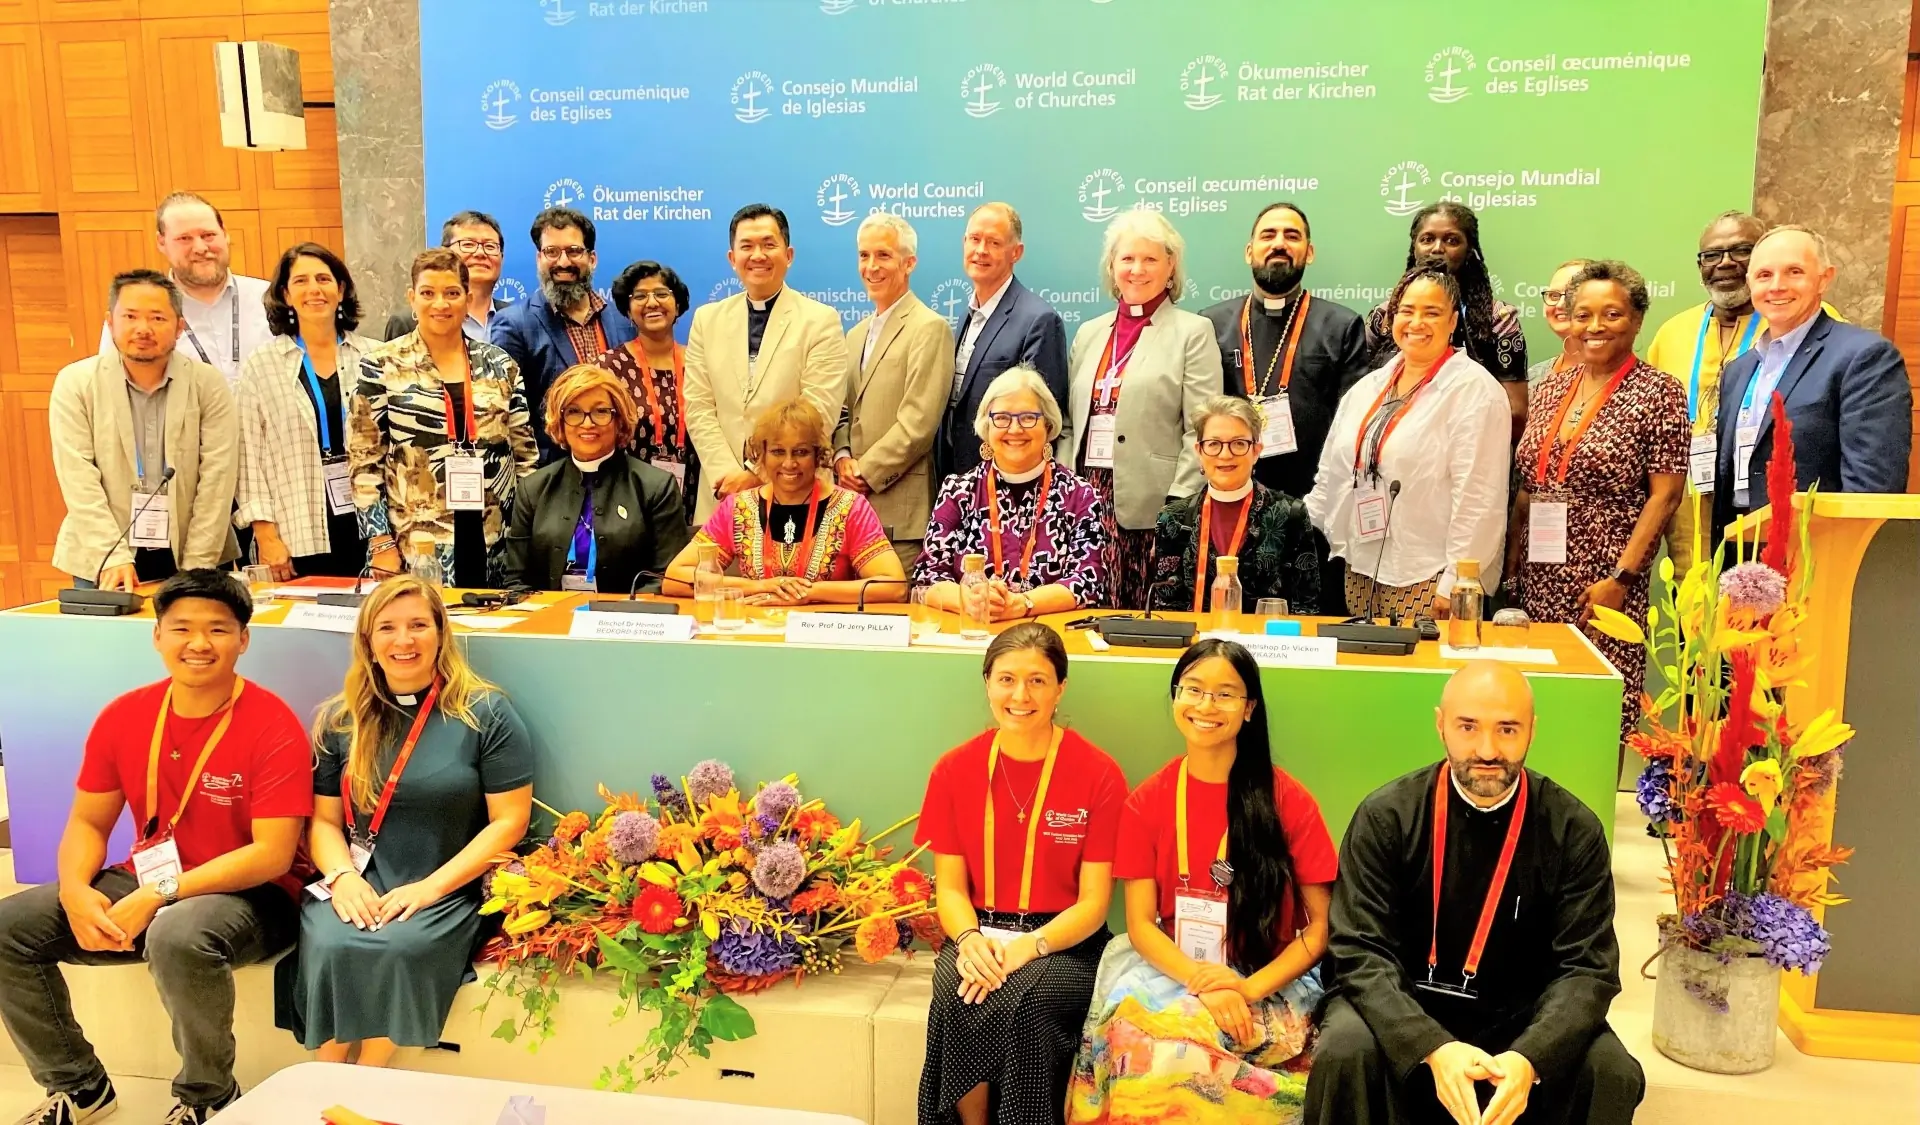 The North American participants in the WCC Central Committee meeting in Geneva